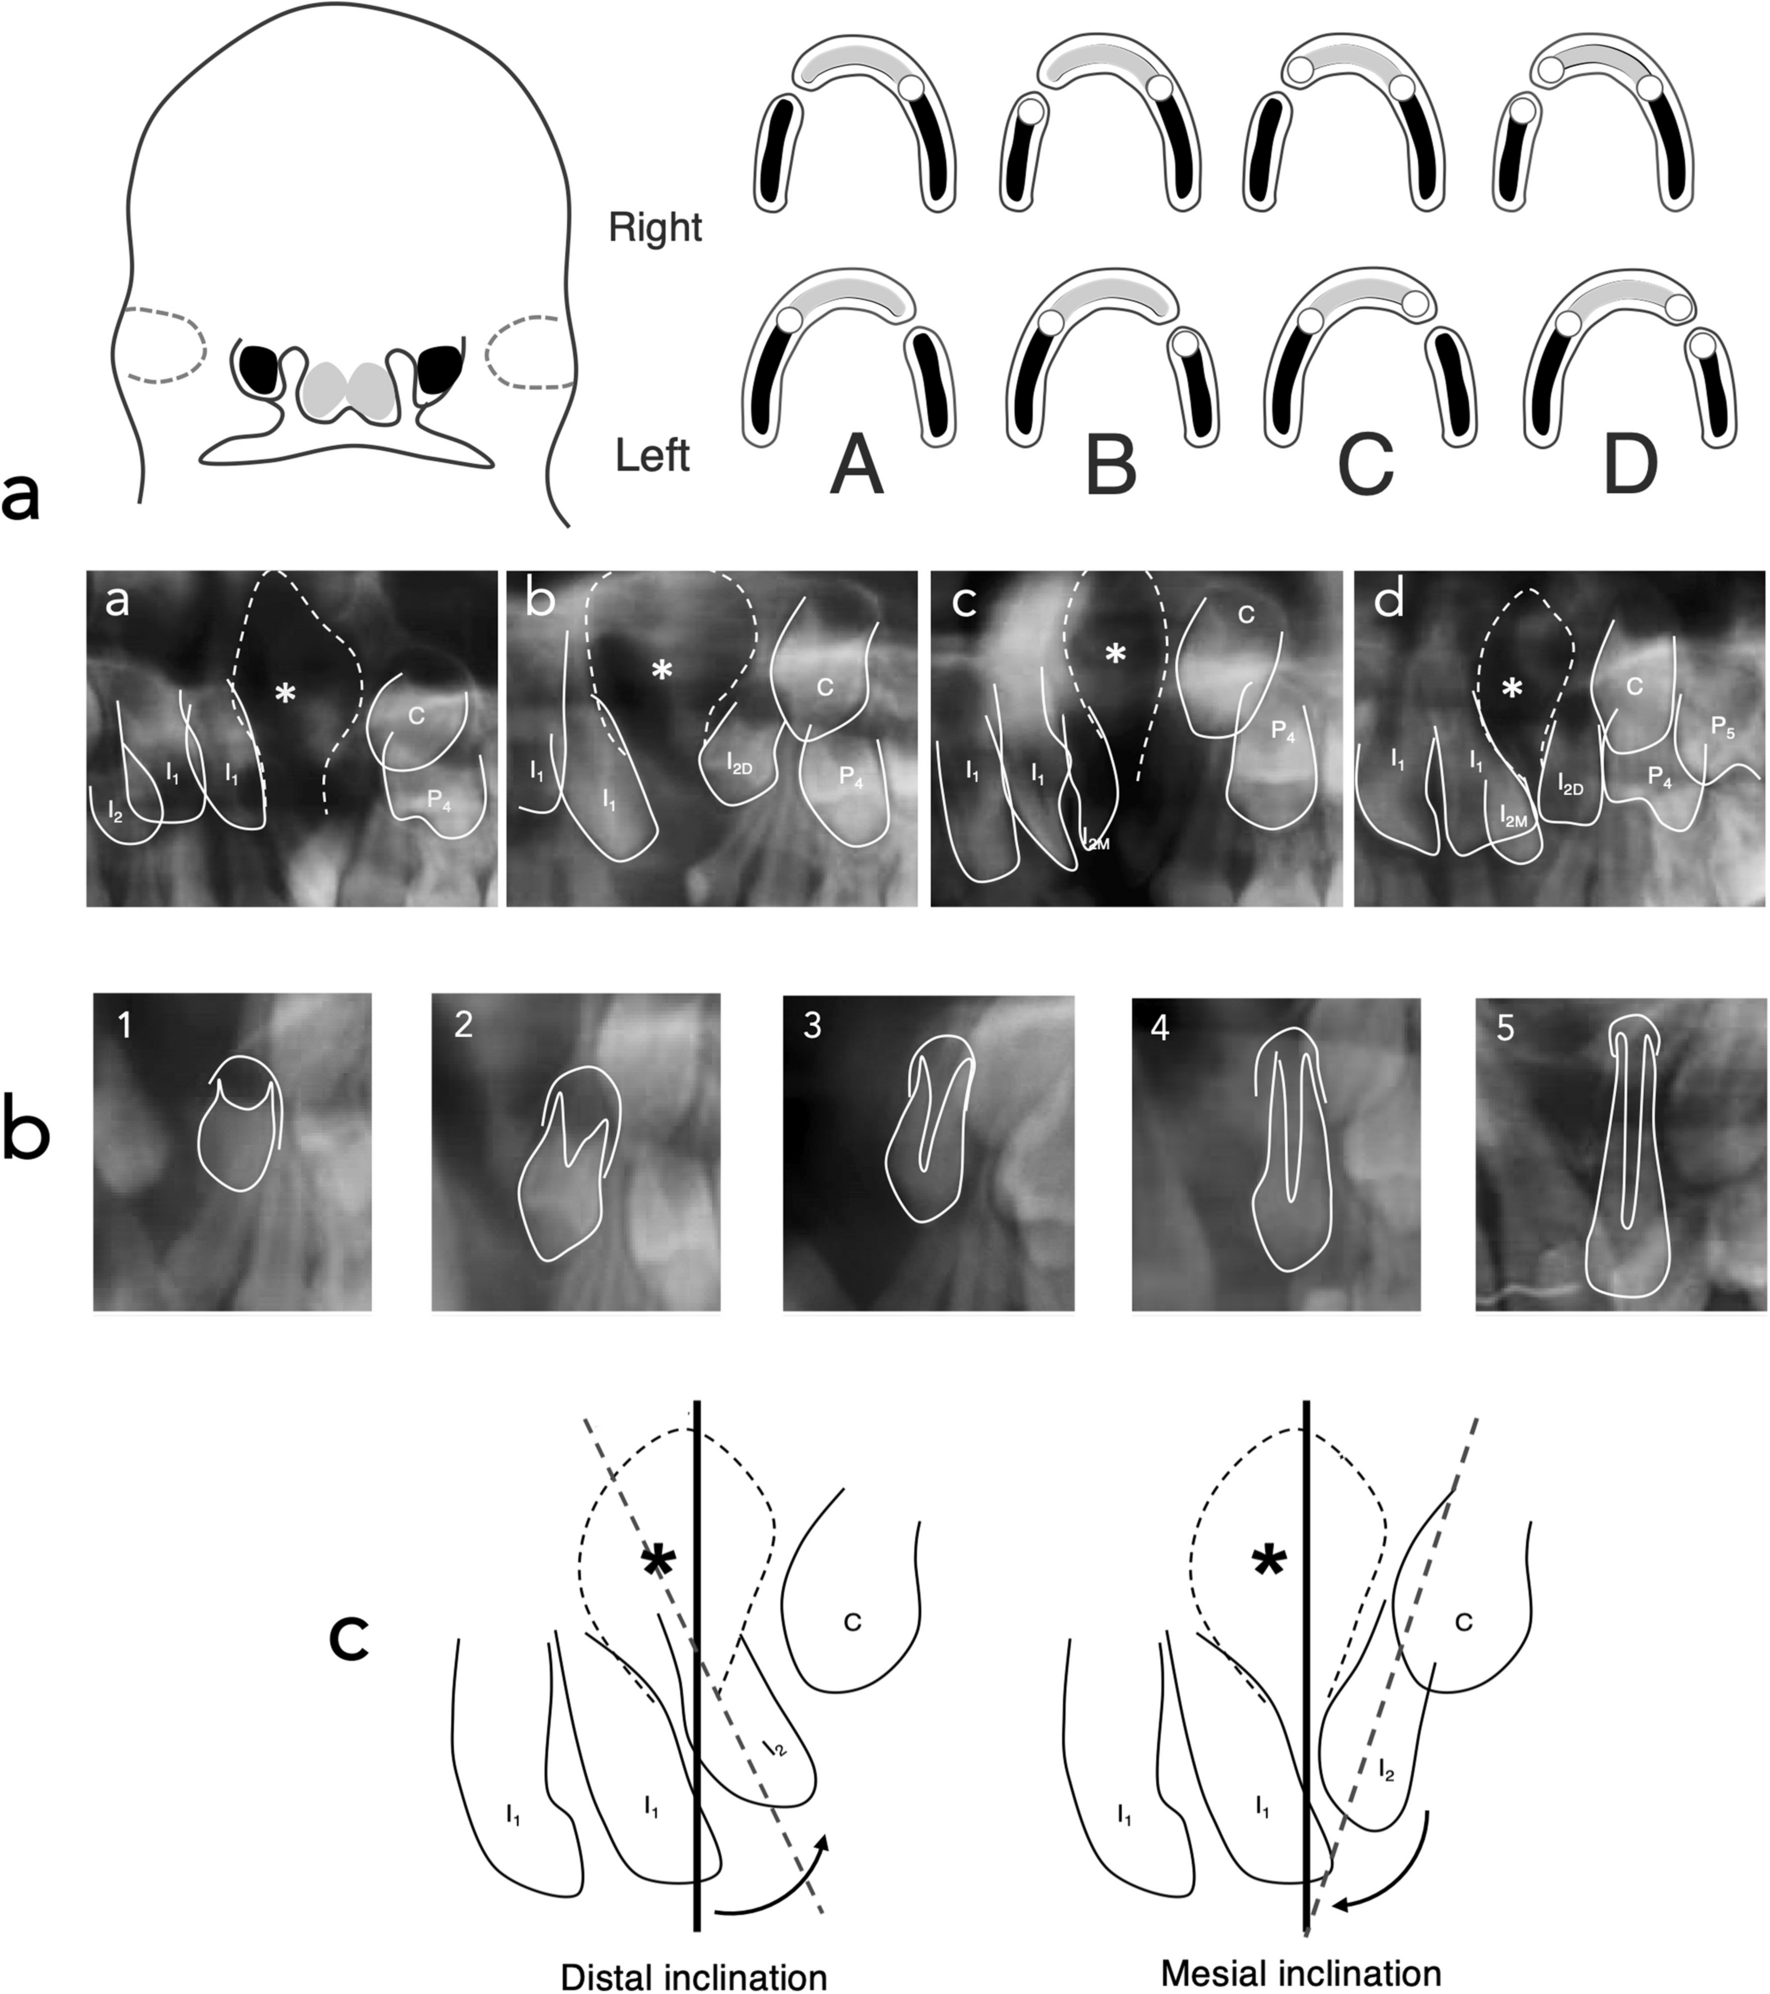 Developmental characteristics of the permanent upper lateral incisor in unilateral cleft lip and palate